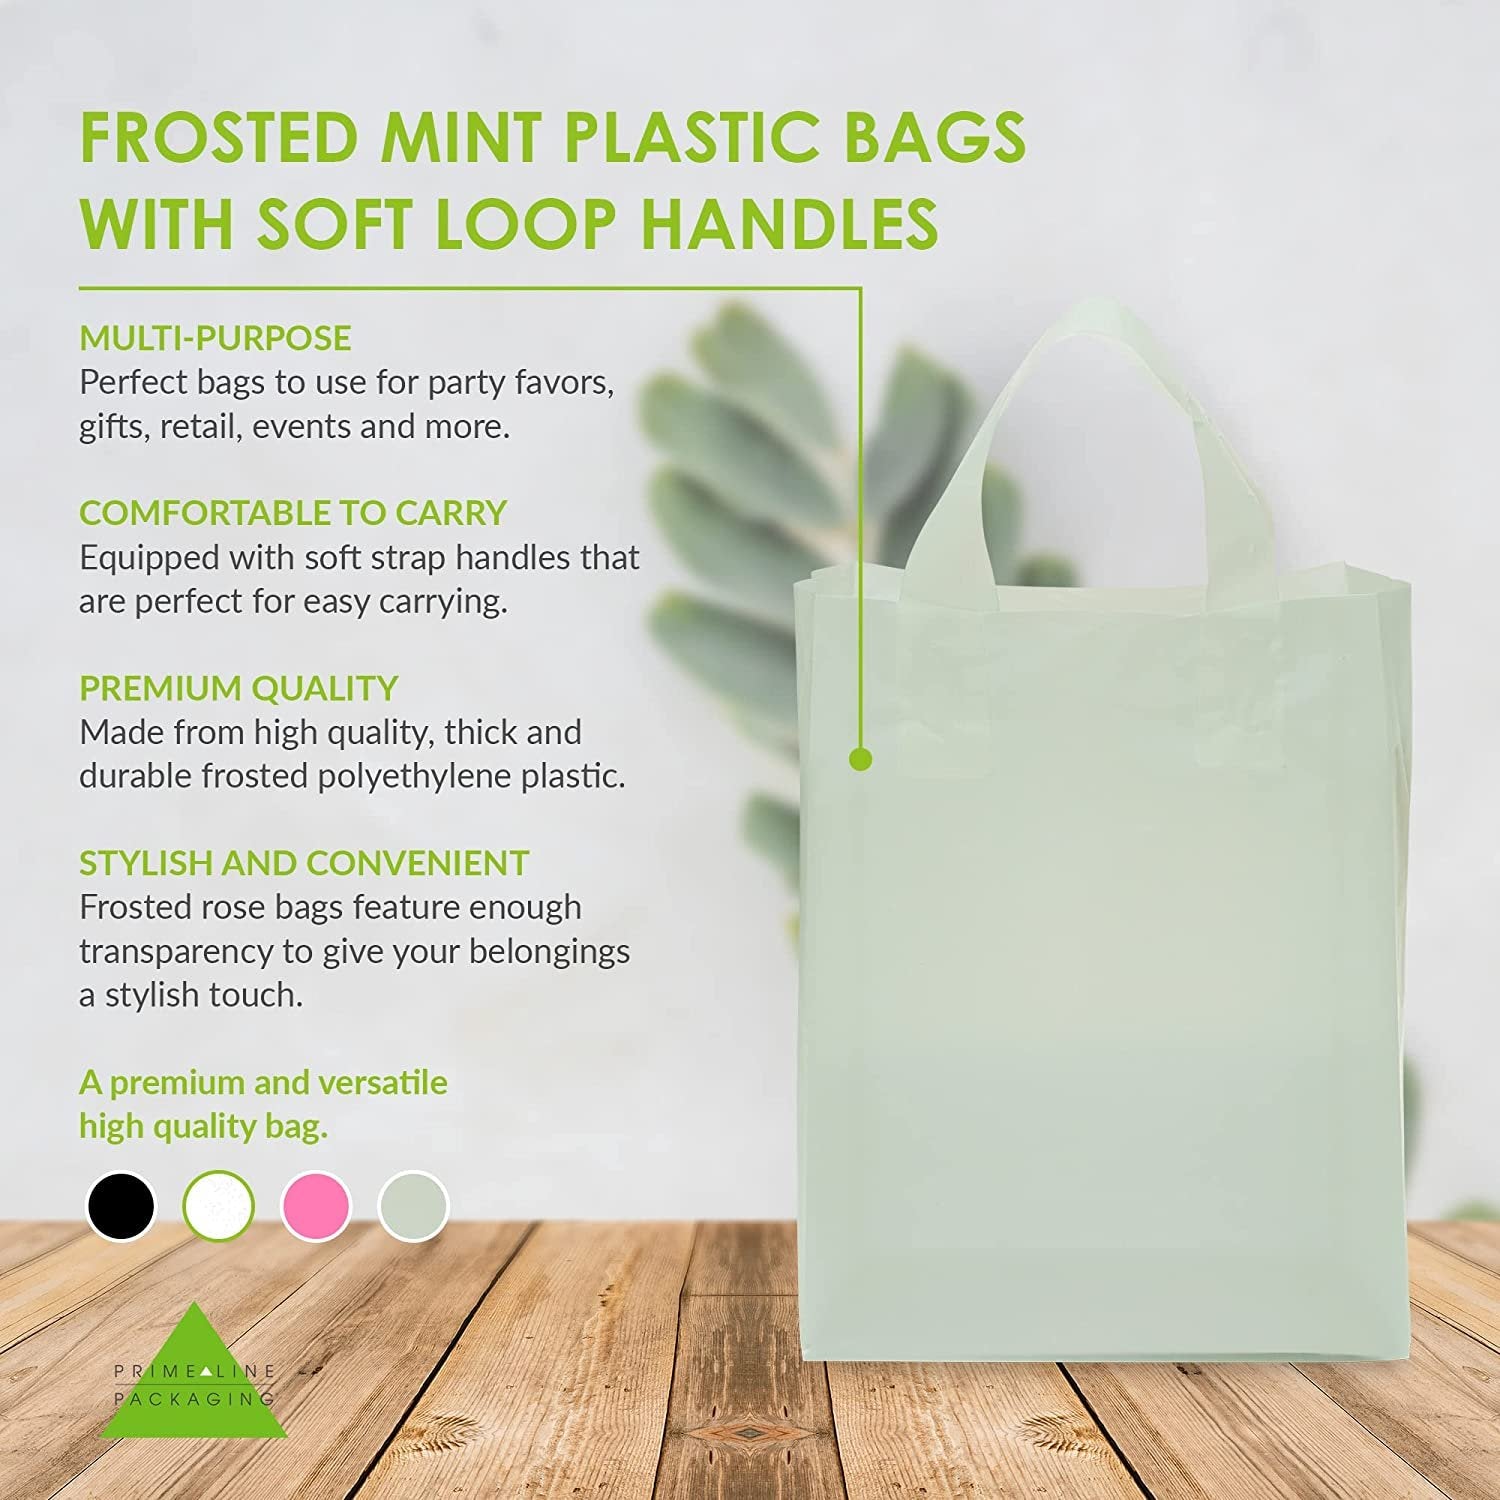 Shopping Bags for Small Business - 8x4x10 Inch 100 Pack Small Frosted Mint Green Colored Plastic Shopping Bags with Handles & Cardboard Bottom for Gifts, Business, Boutique & Retail Customers in Bulk